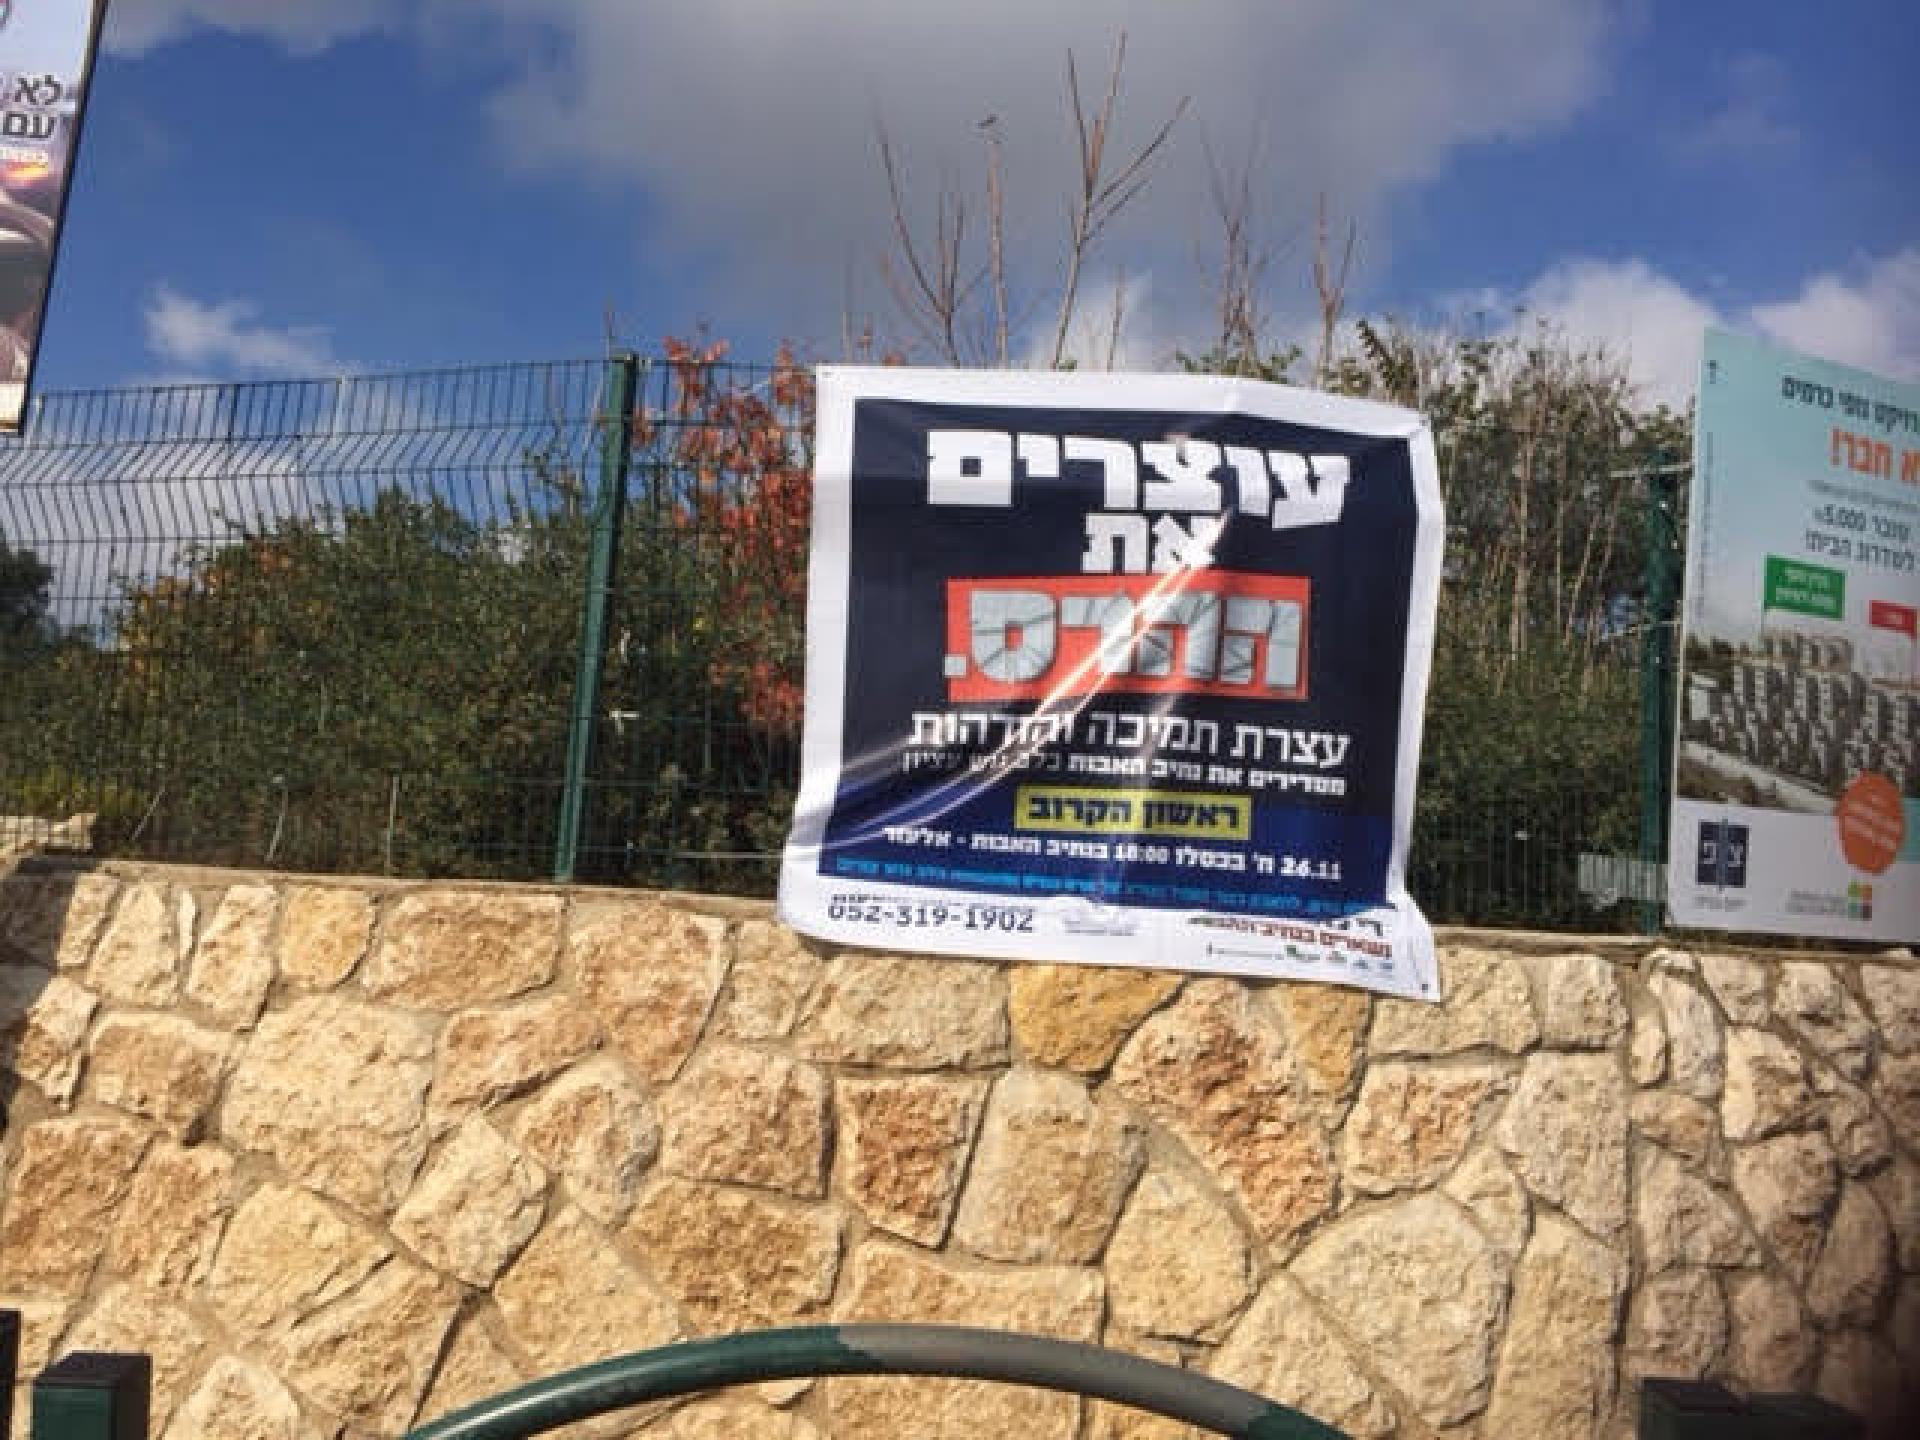 The new weekly flier which waves on the notice boards of Kiryat Arba